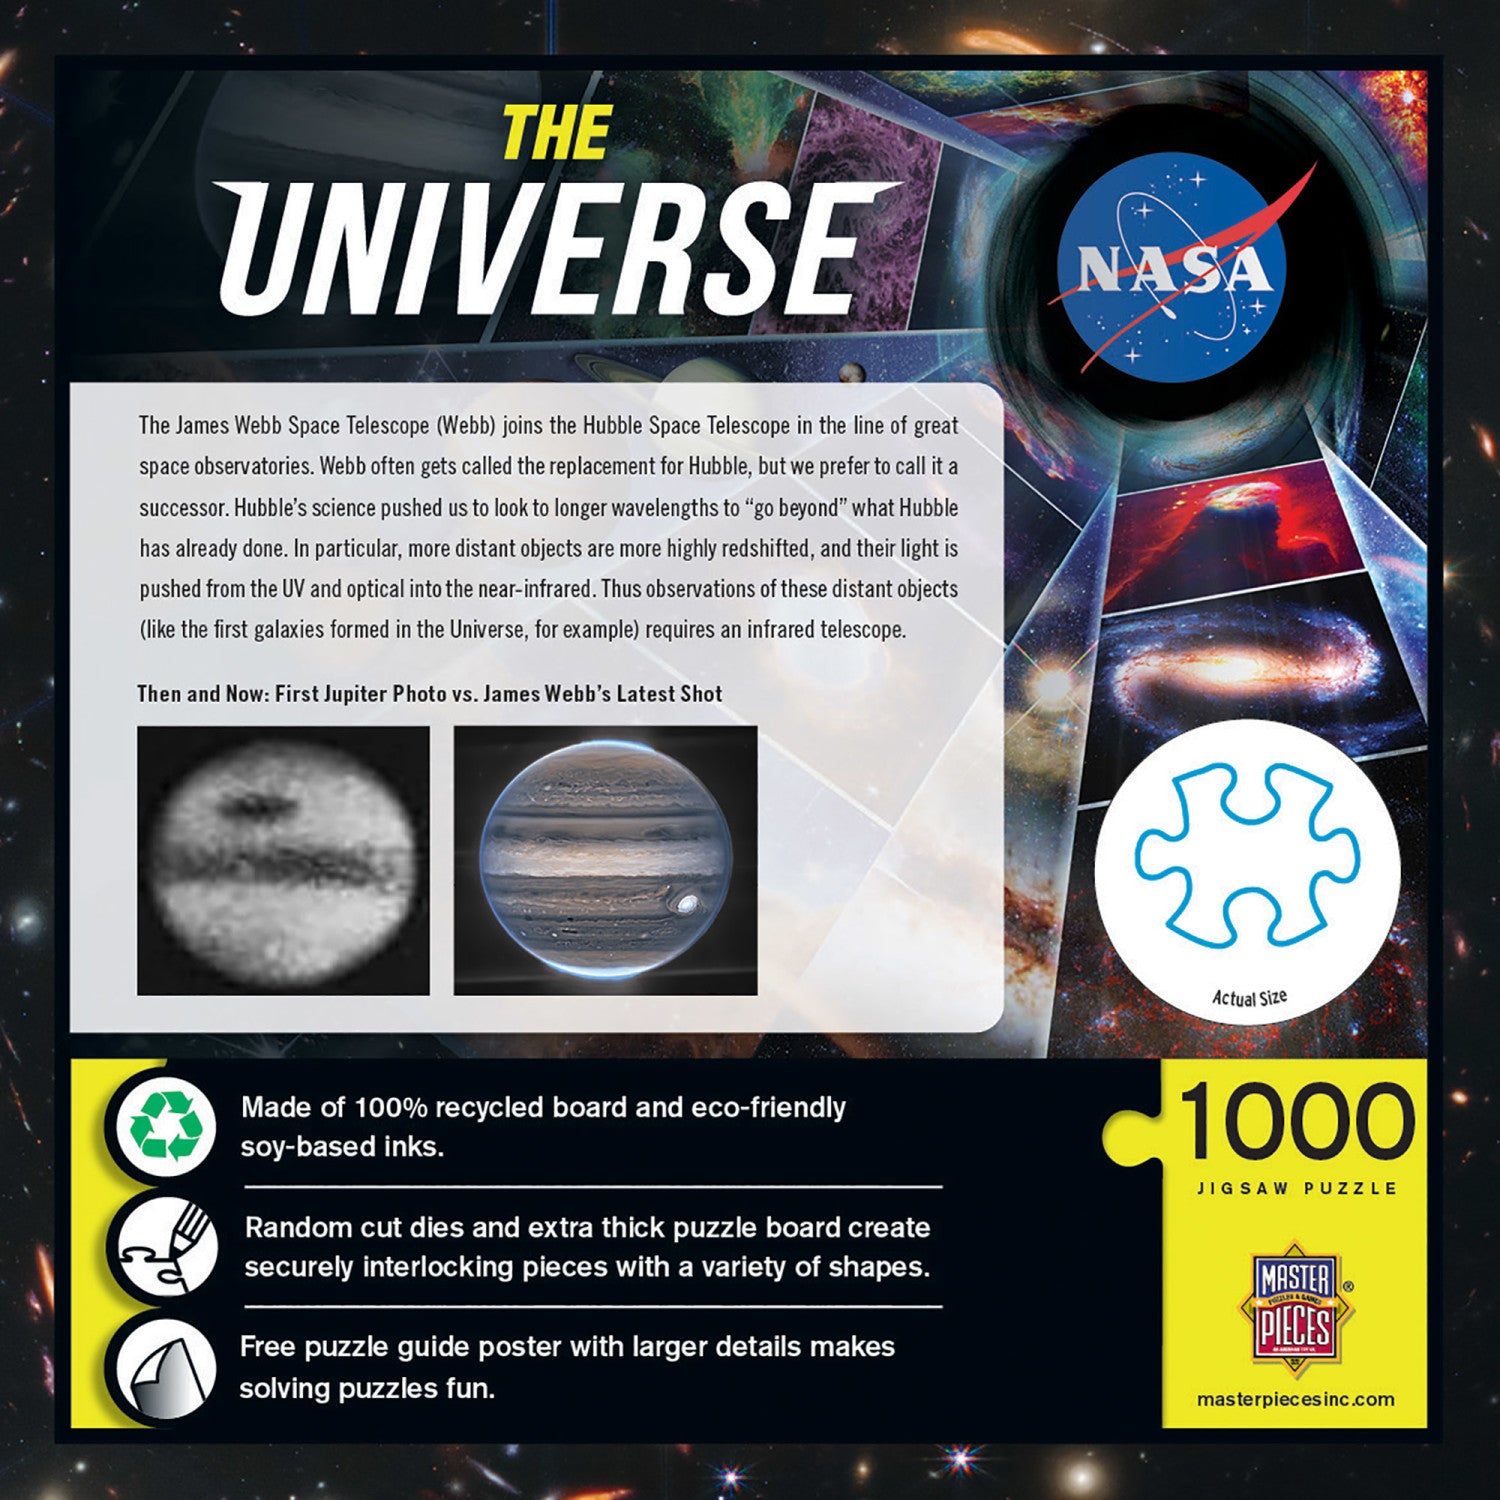 The Universe - 1000 Piece Jigsaw Puzzle